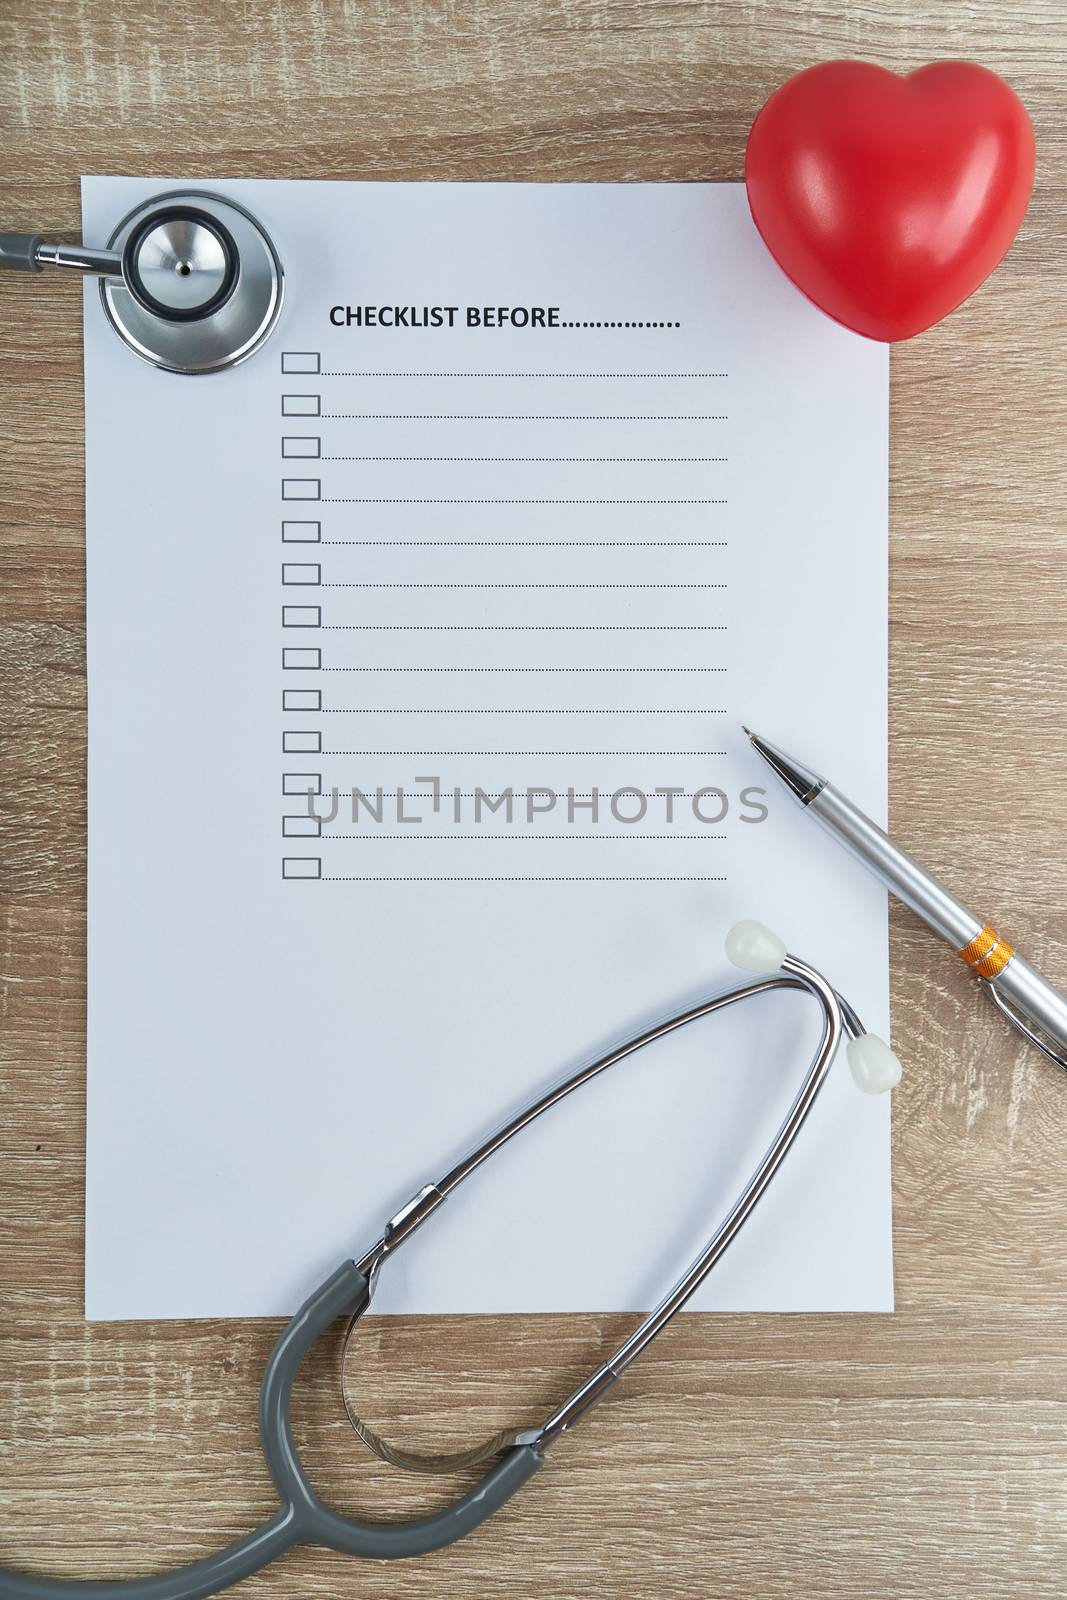 Close up old silver medical stethoscope and silver pen with red heart on empty checklist form with wood table and copy space. Healthcare and medical concept photography.